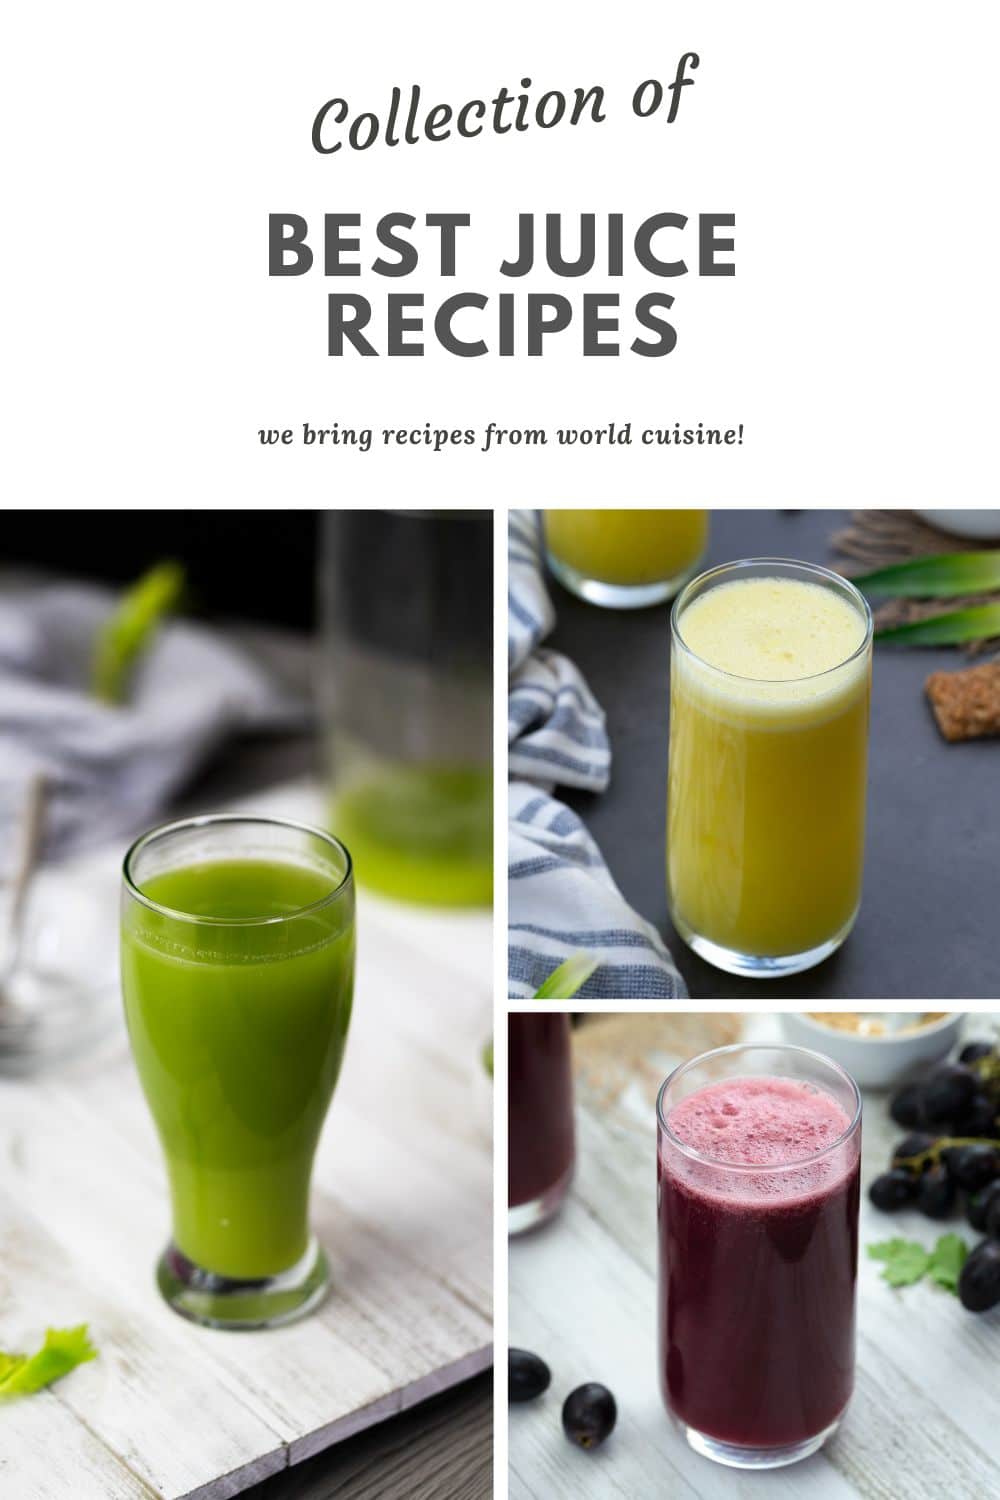 Collection of Juice Recipes